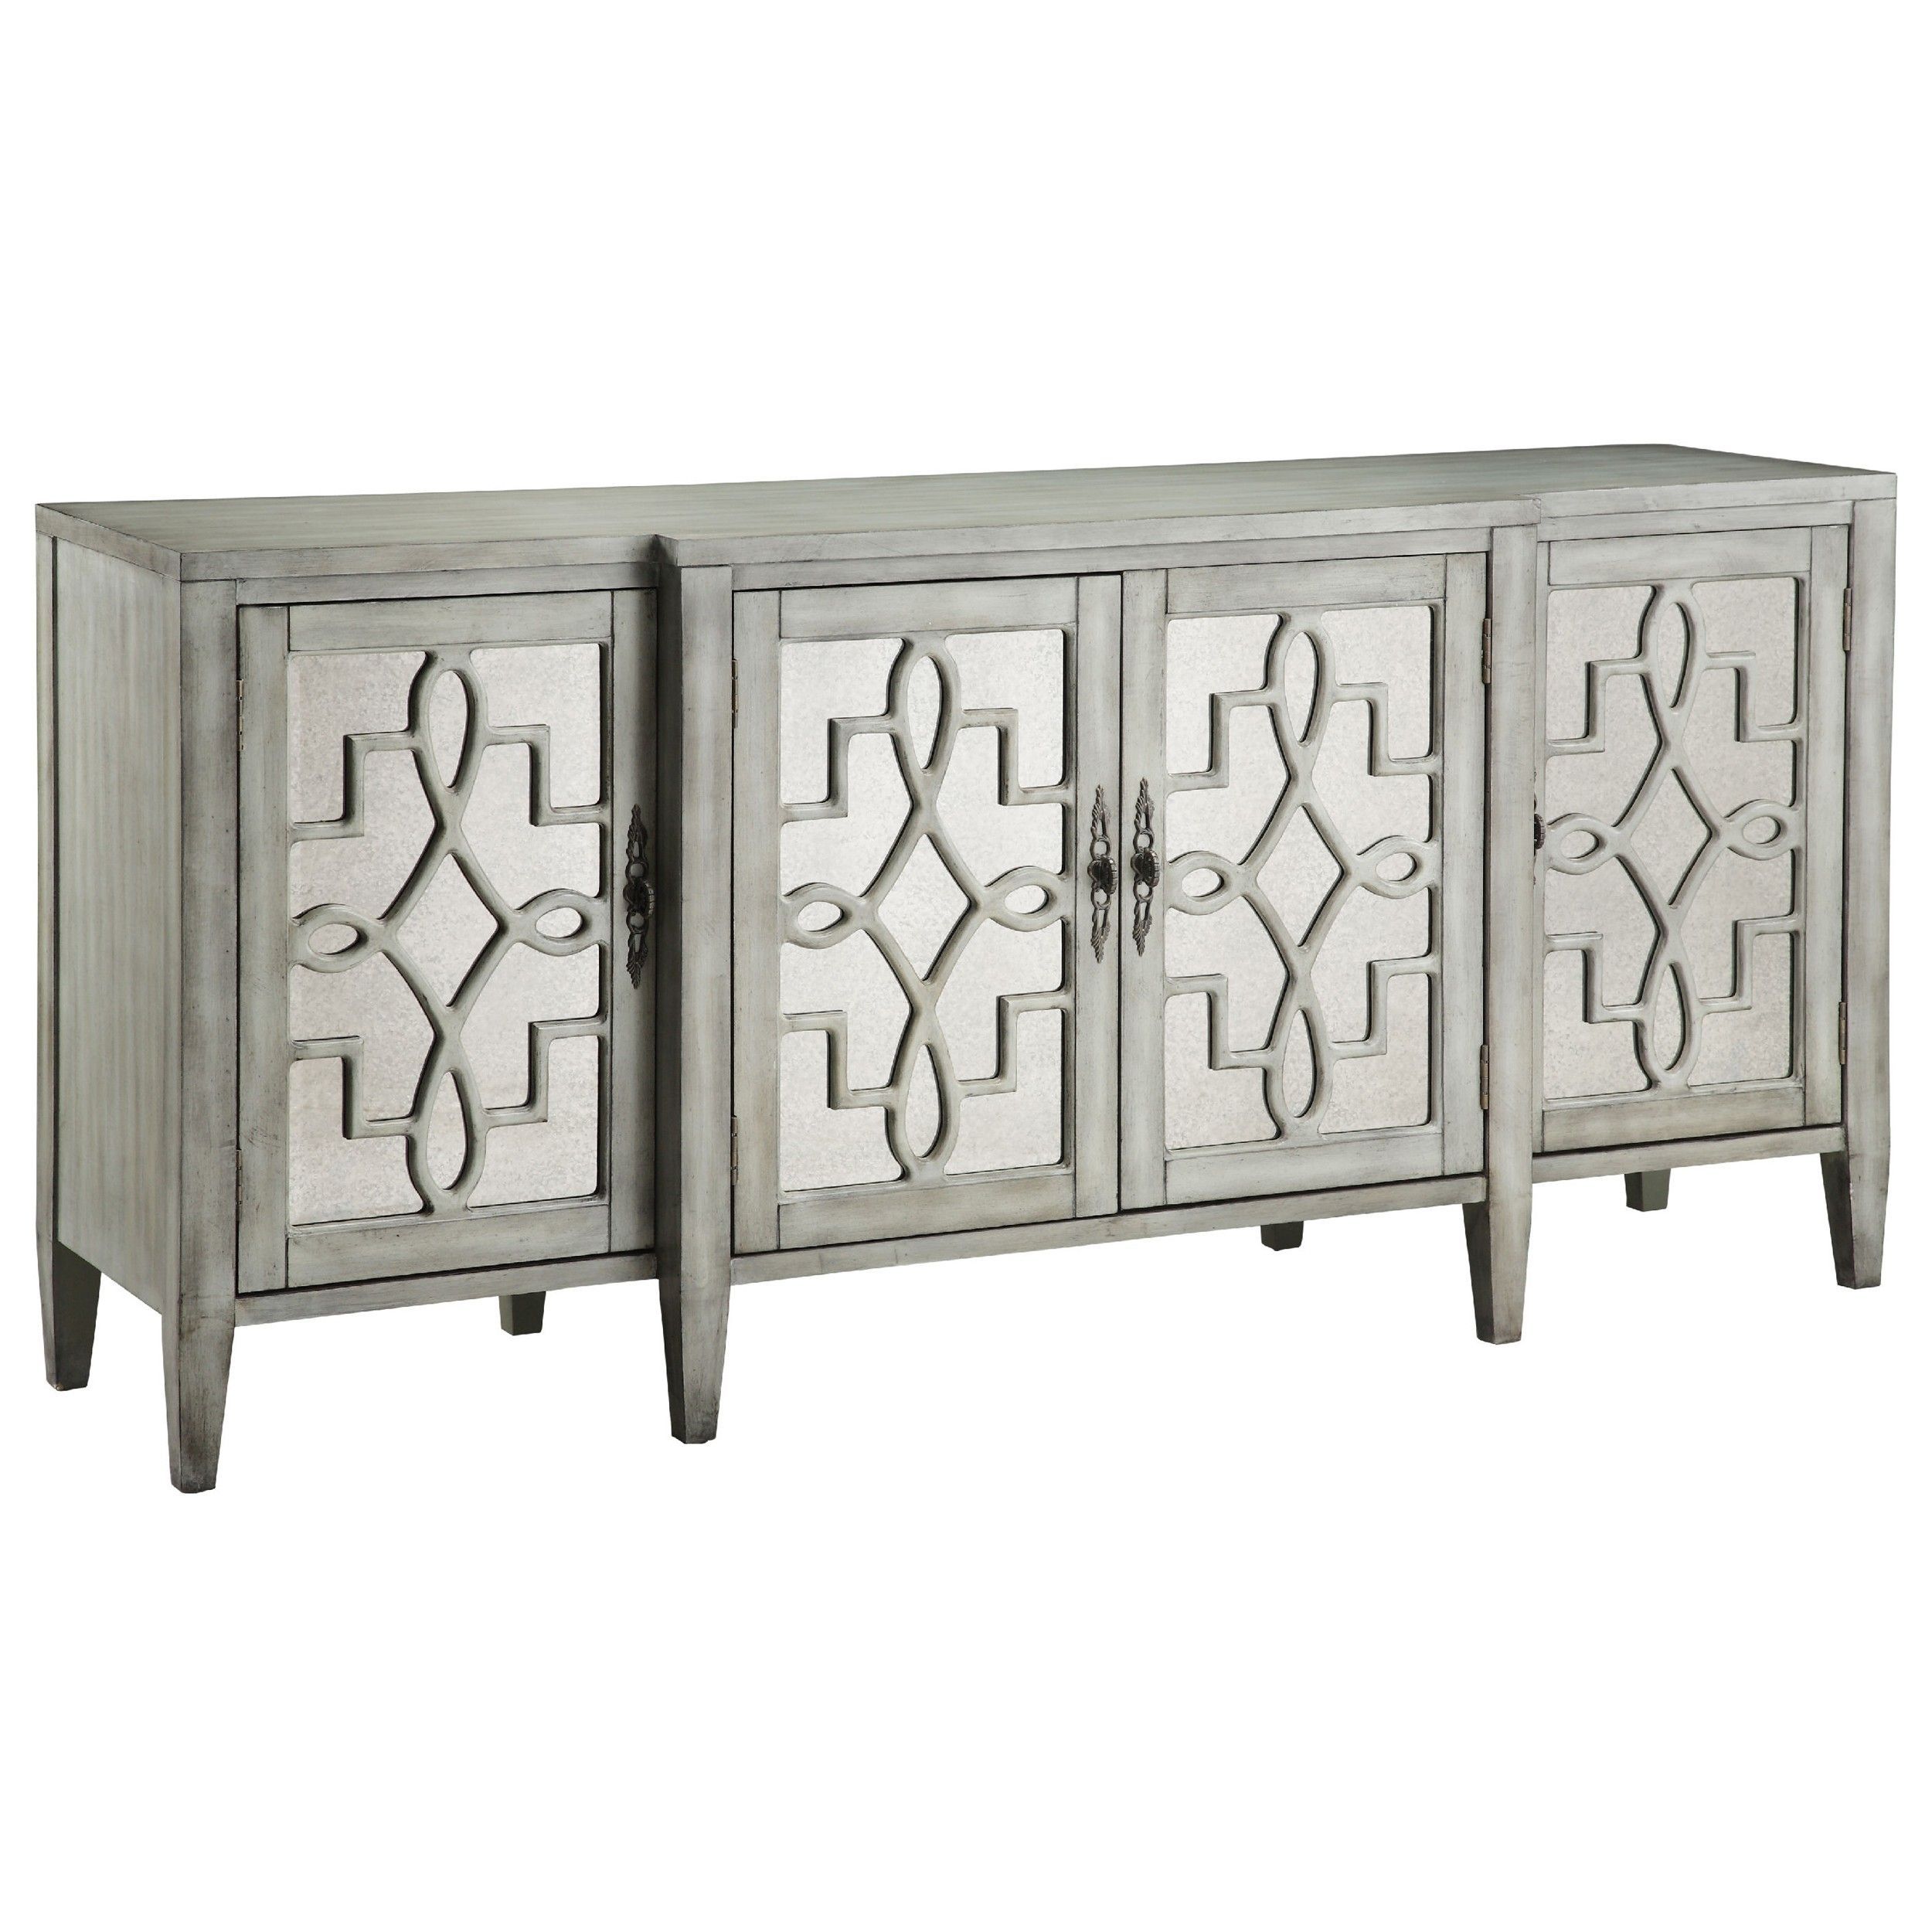 Isabelle Credenza | Furnishings | Pinterest | Credenza, Sideboard Within 2 Door Mirror Front Sideboards (Photo 3 of 30)